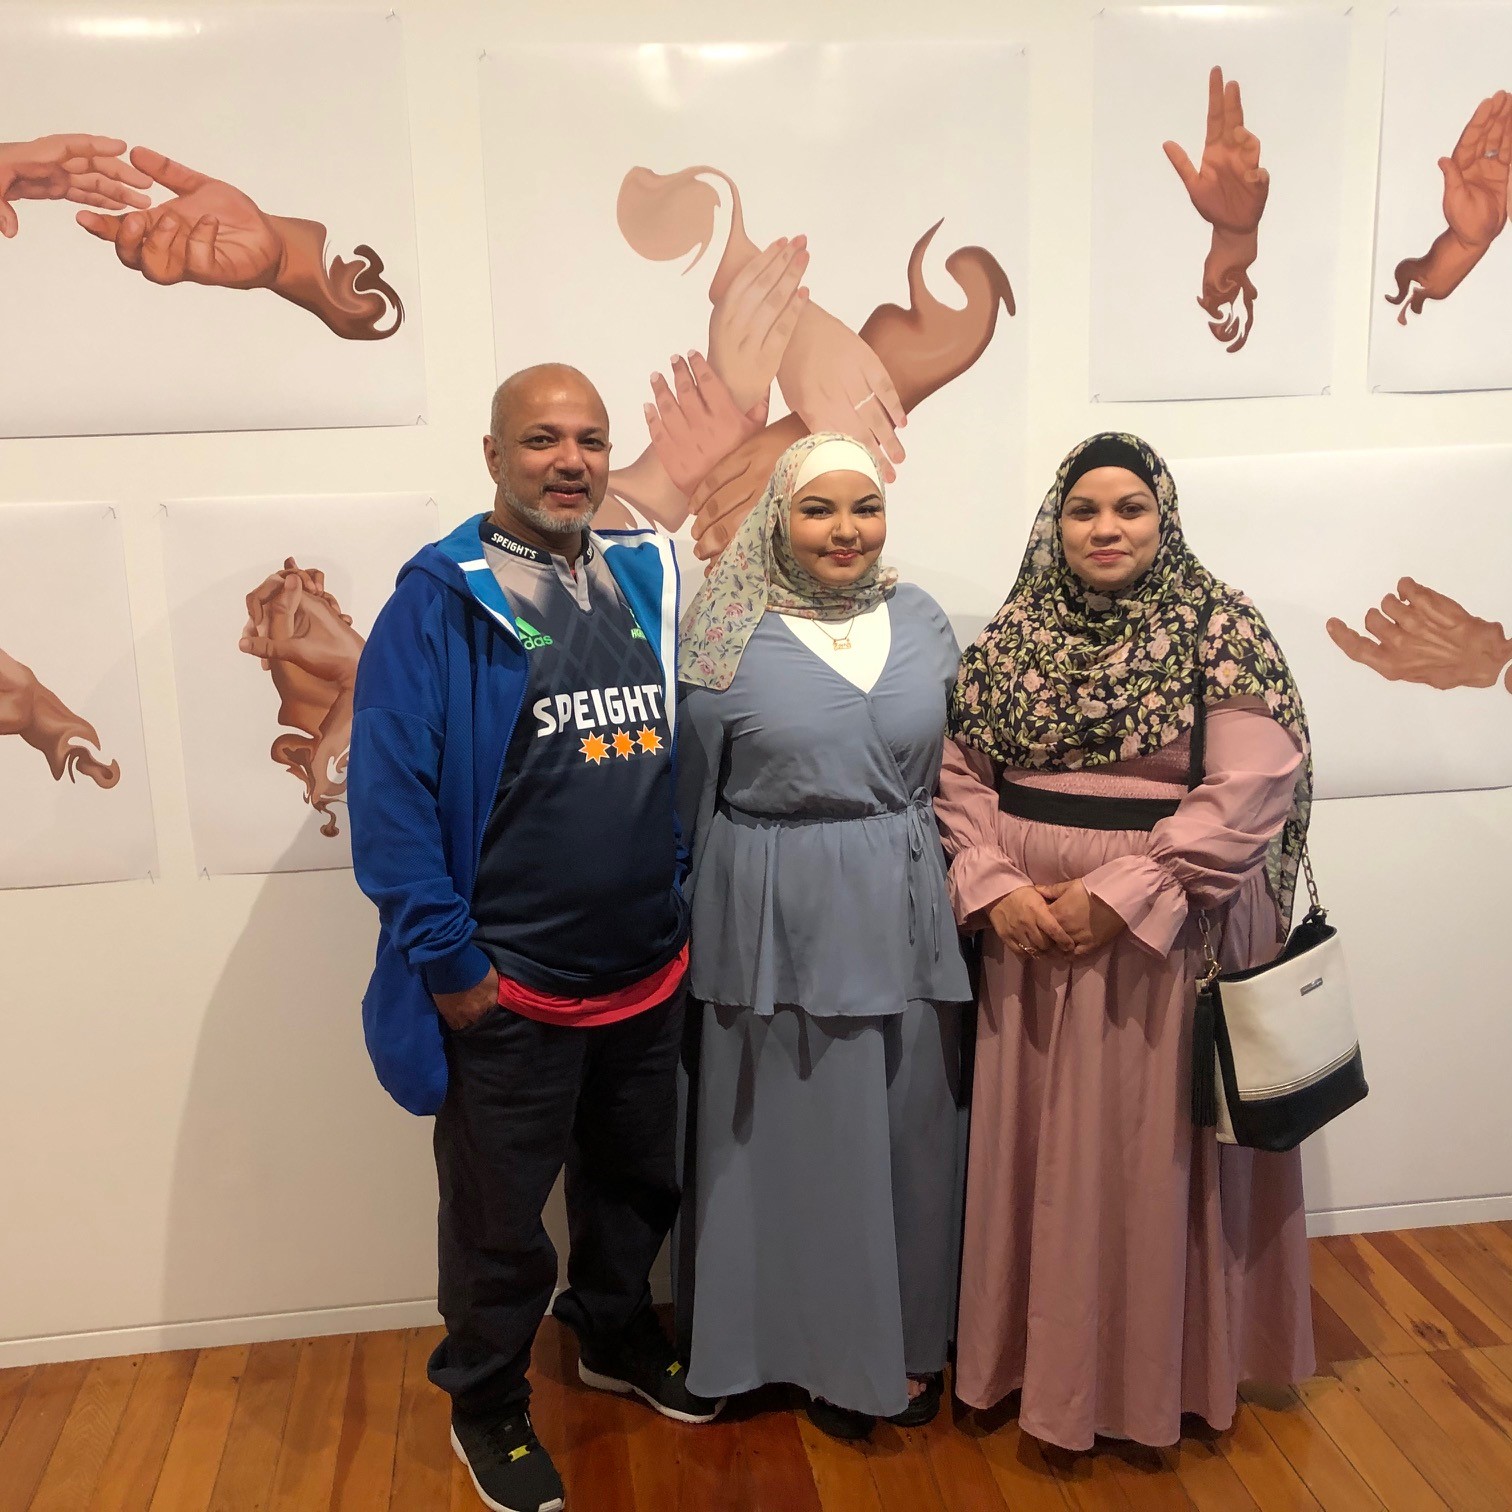 Zena and her parents Mohamed Yakoub and Fariall Nisha at Connections opening.